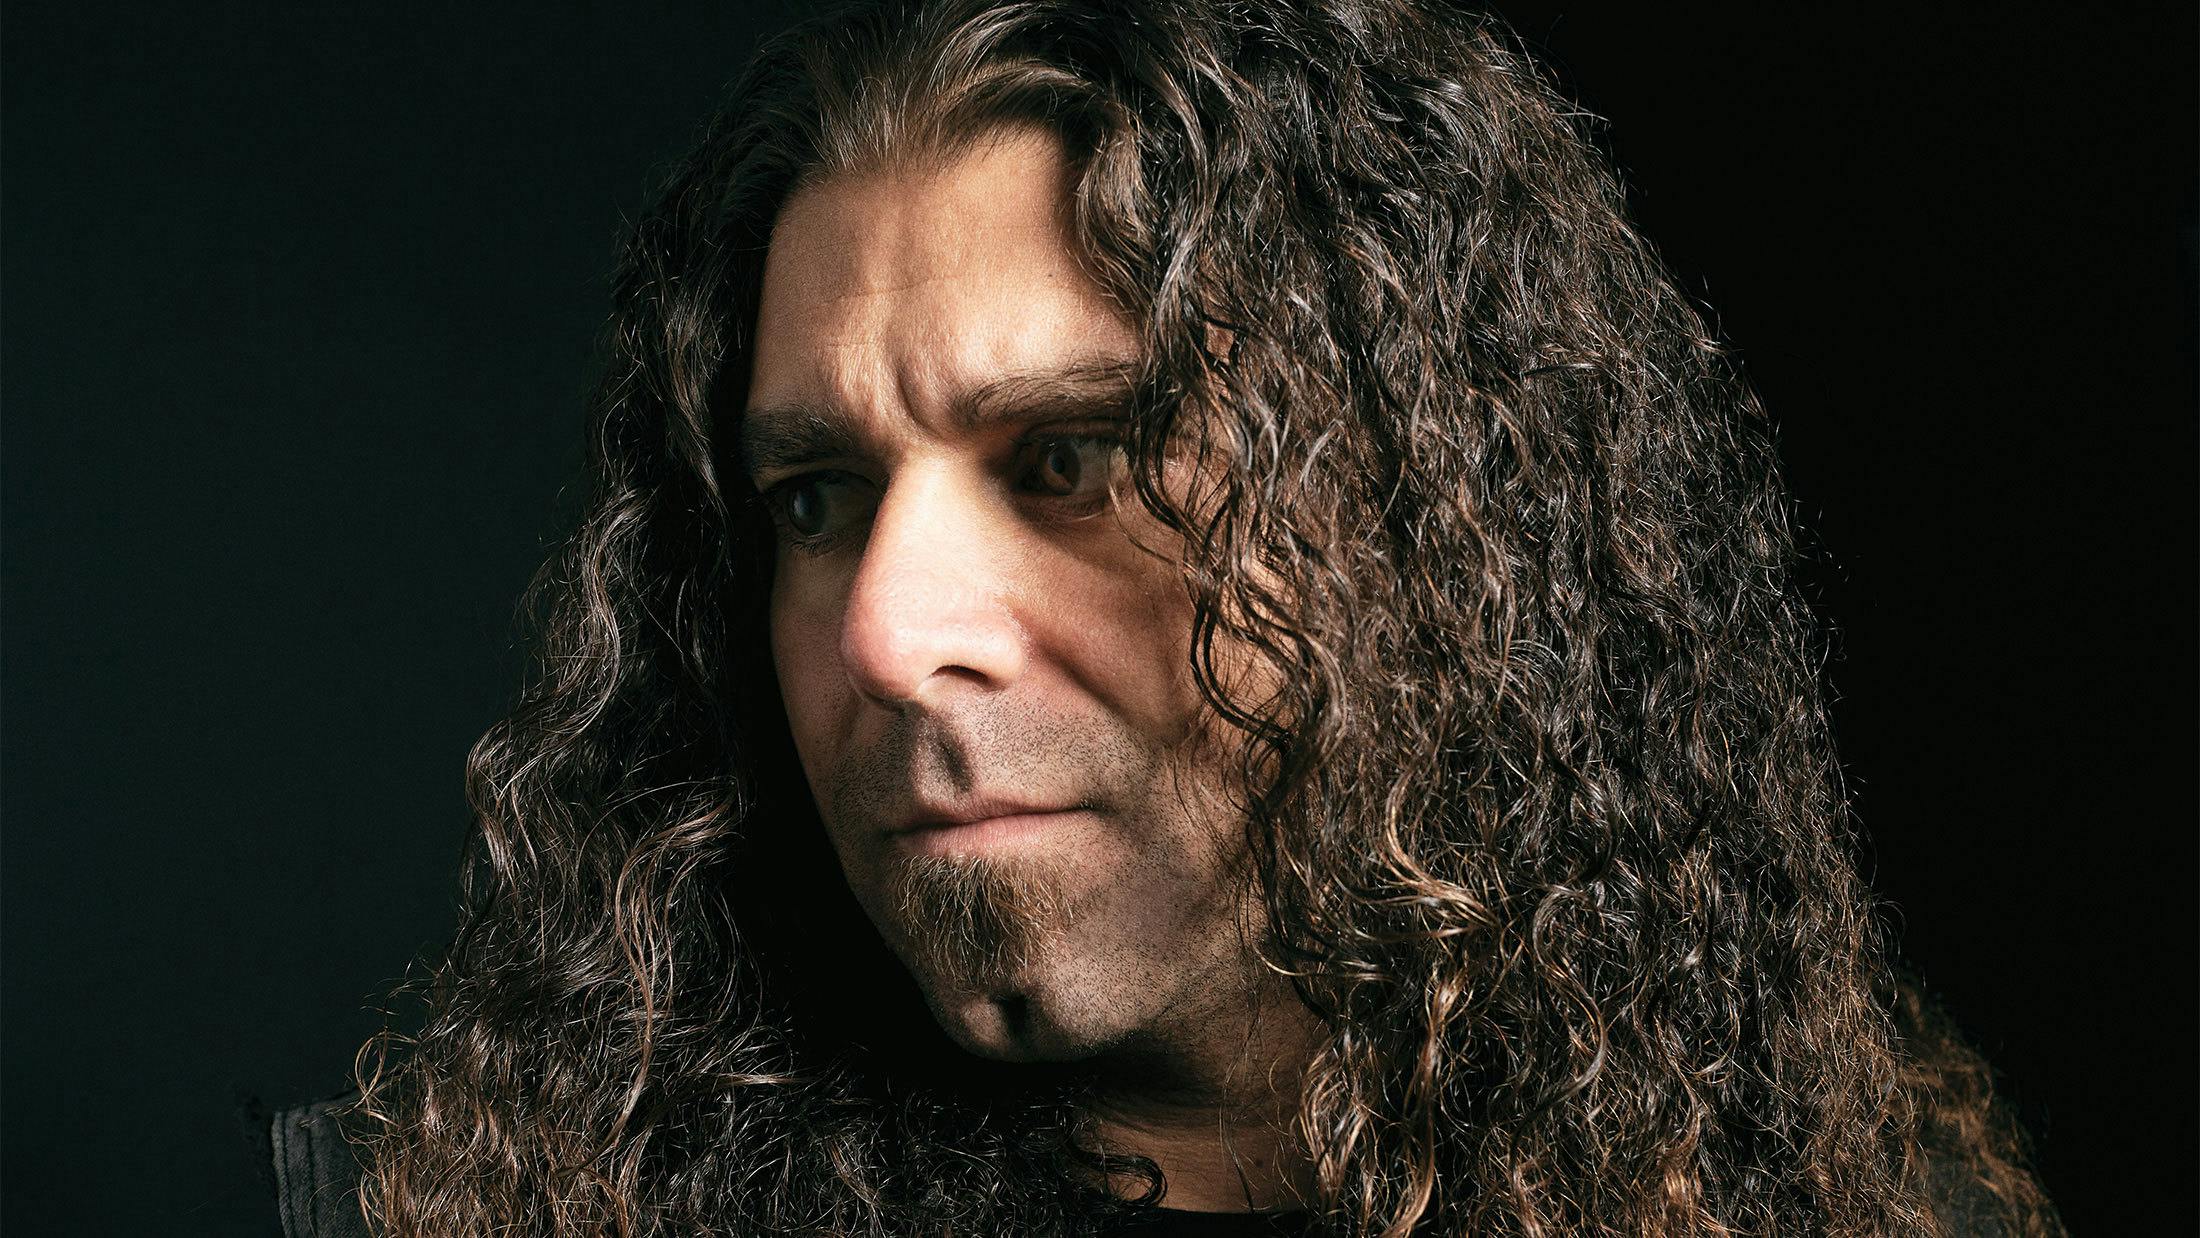 Claudio Sanchez: “Sometimes I look at us and think of King Kong… We’re these savages from the jungle put out there as a spectacle”